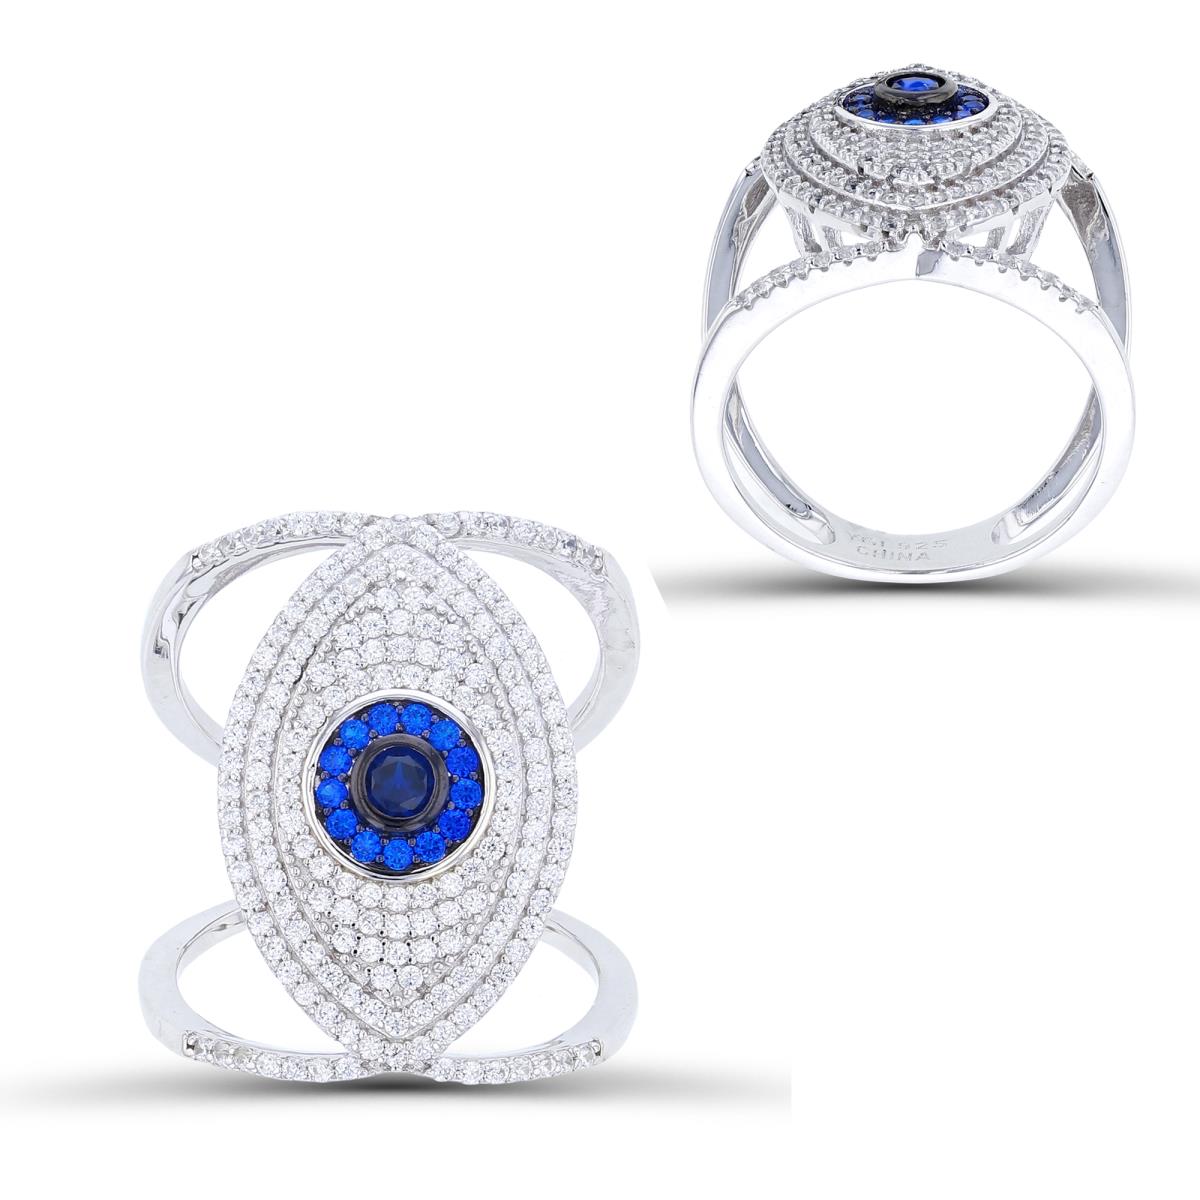 Sterling Silver Two-Tone (W/B) Micropave Rnd #113 Blue Spinel & White CZ Evil Eye Open Ring